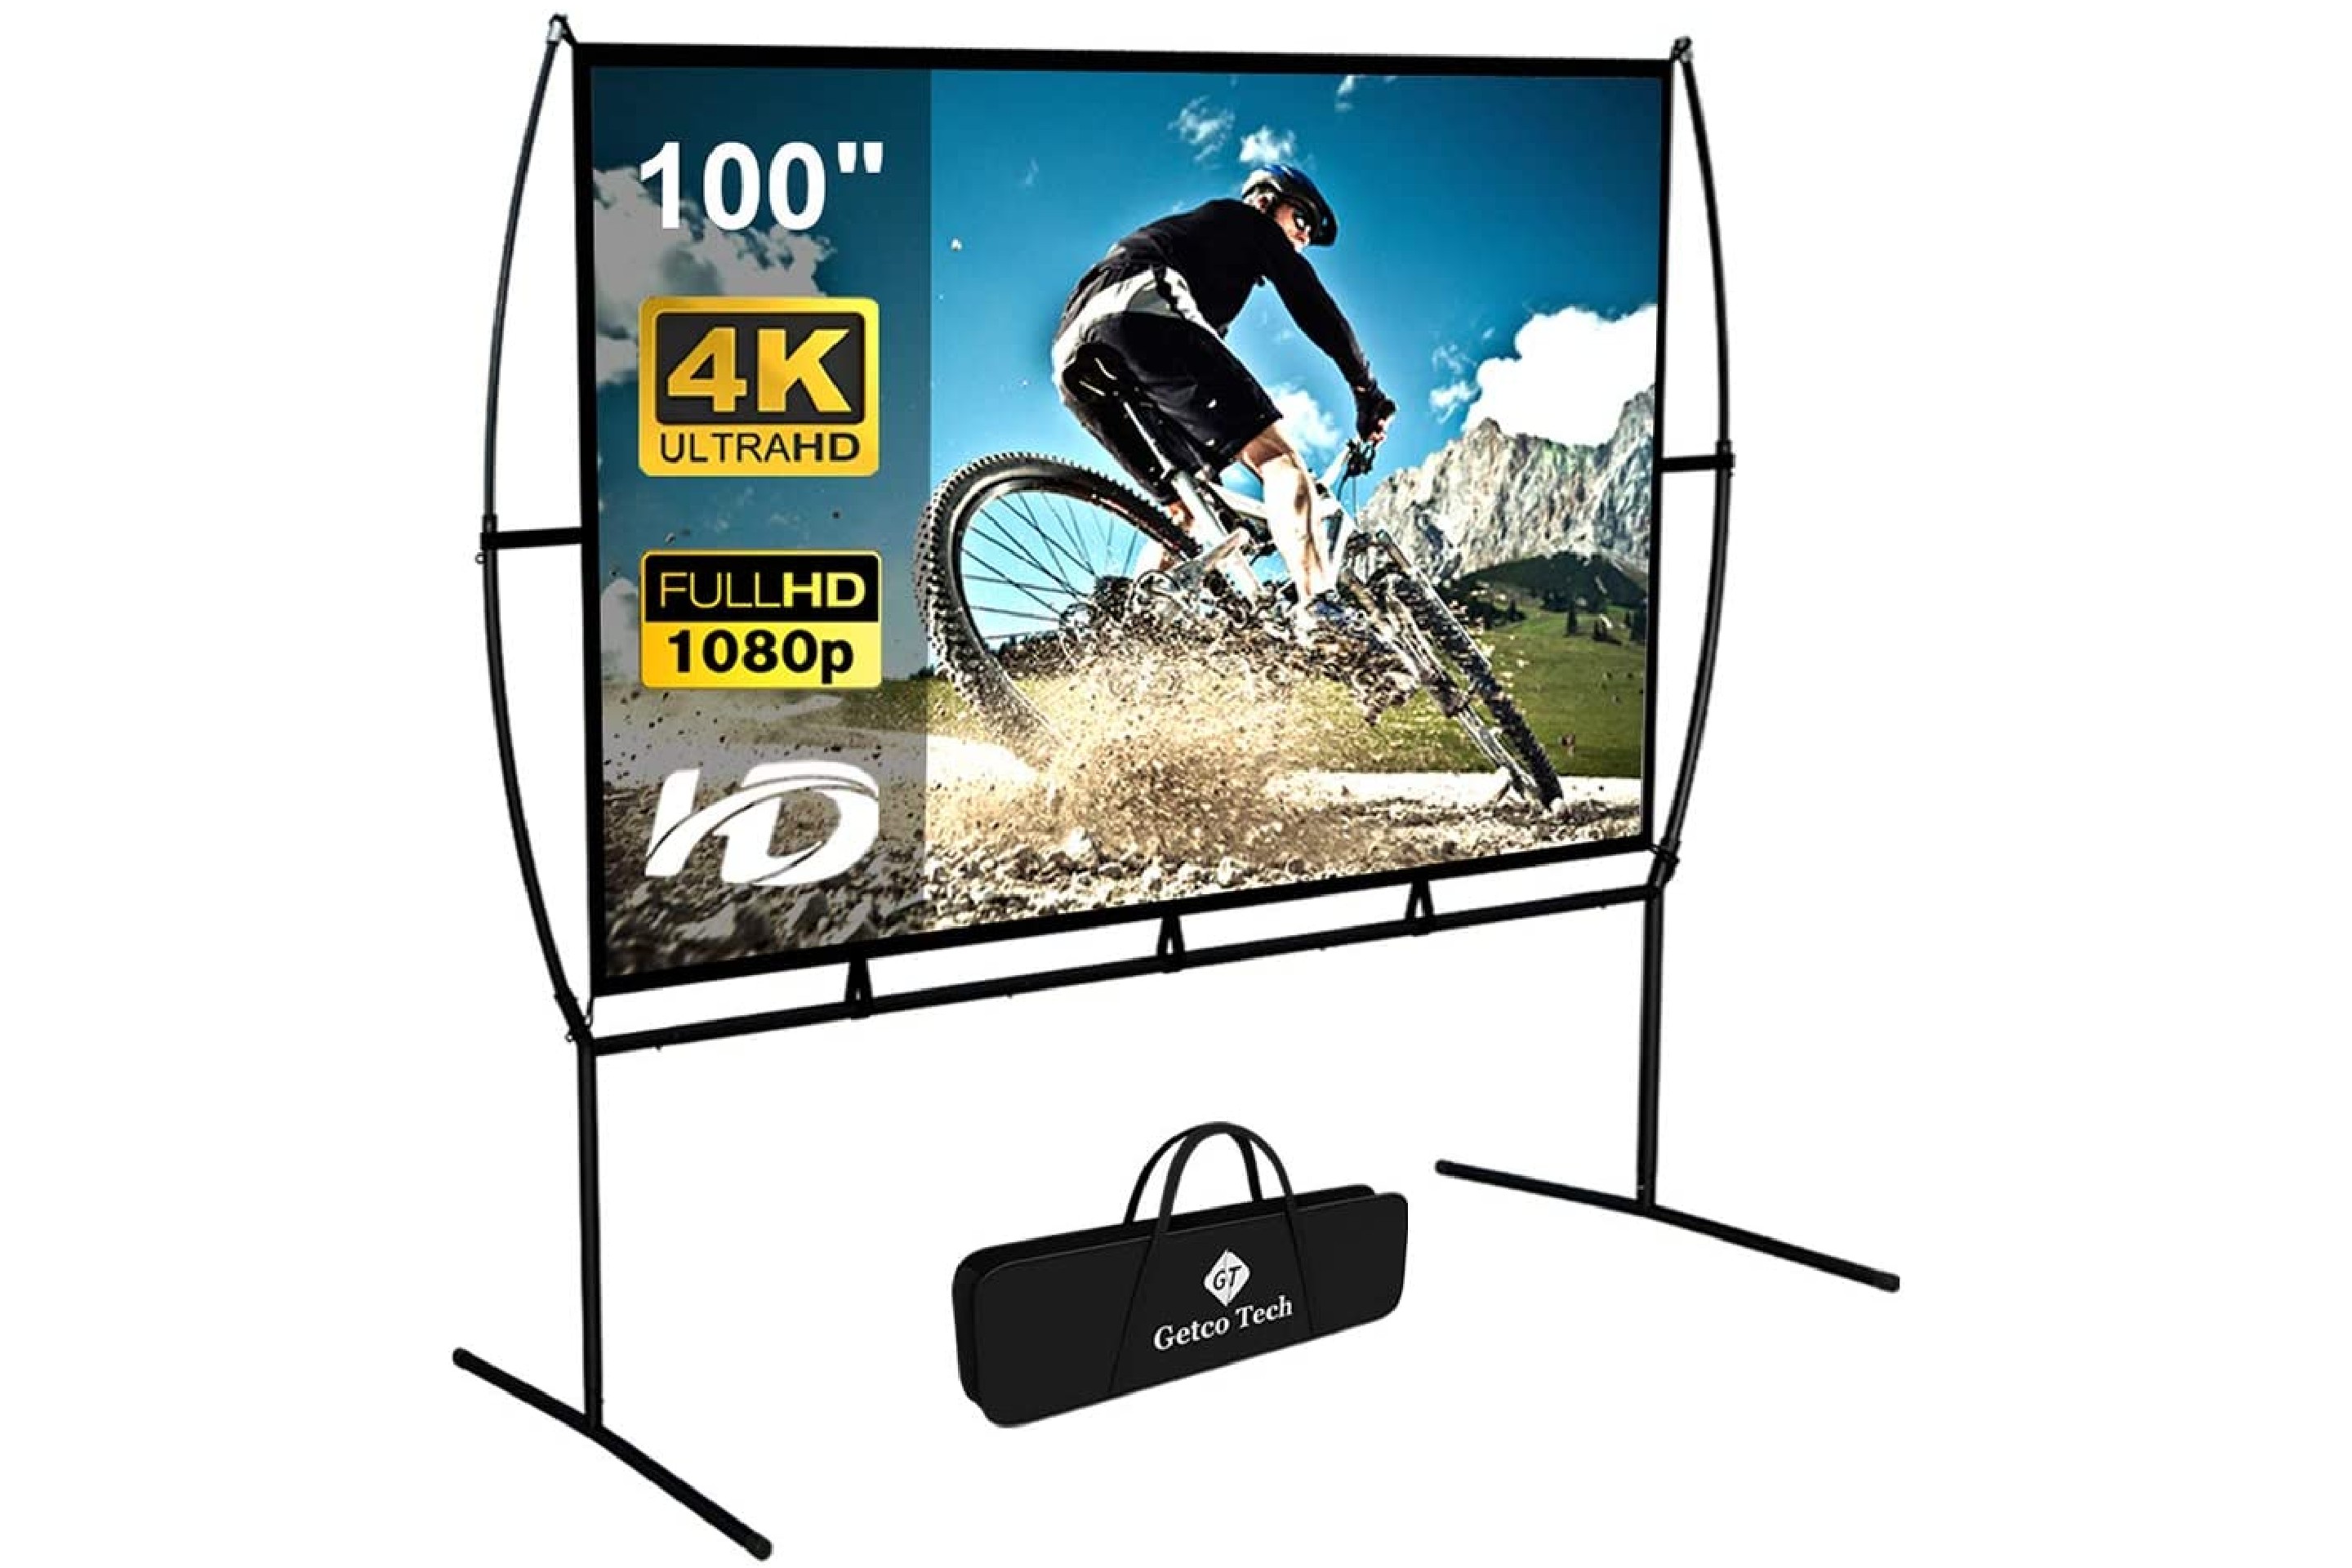 GT Getcho Tech Foldable Projector Screen